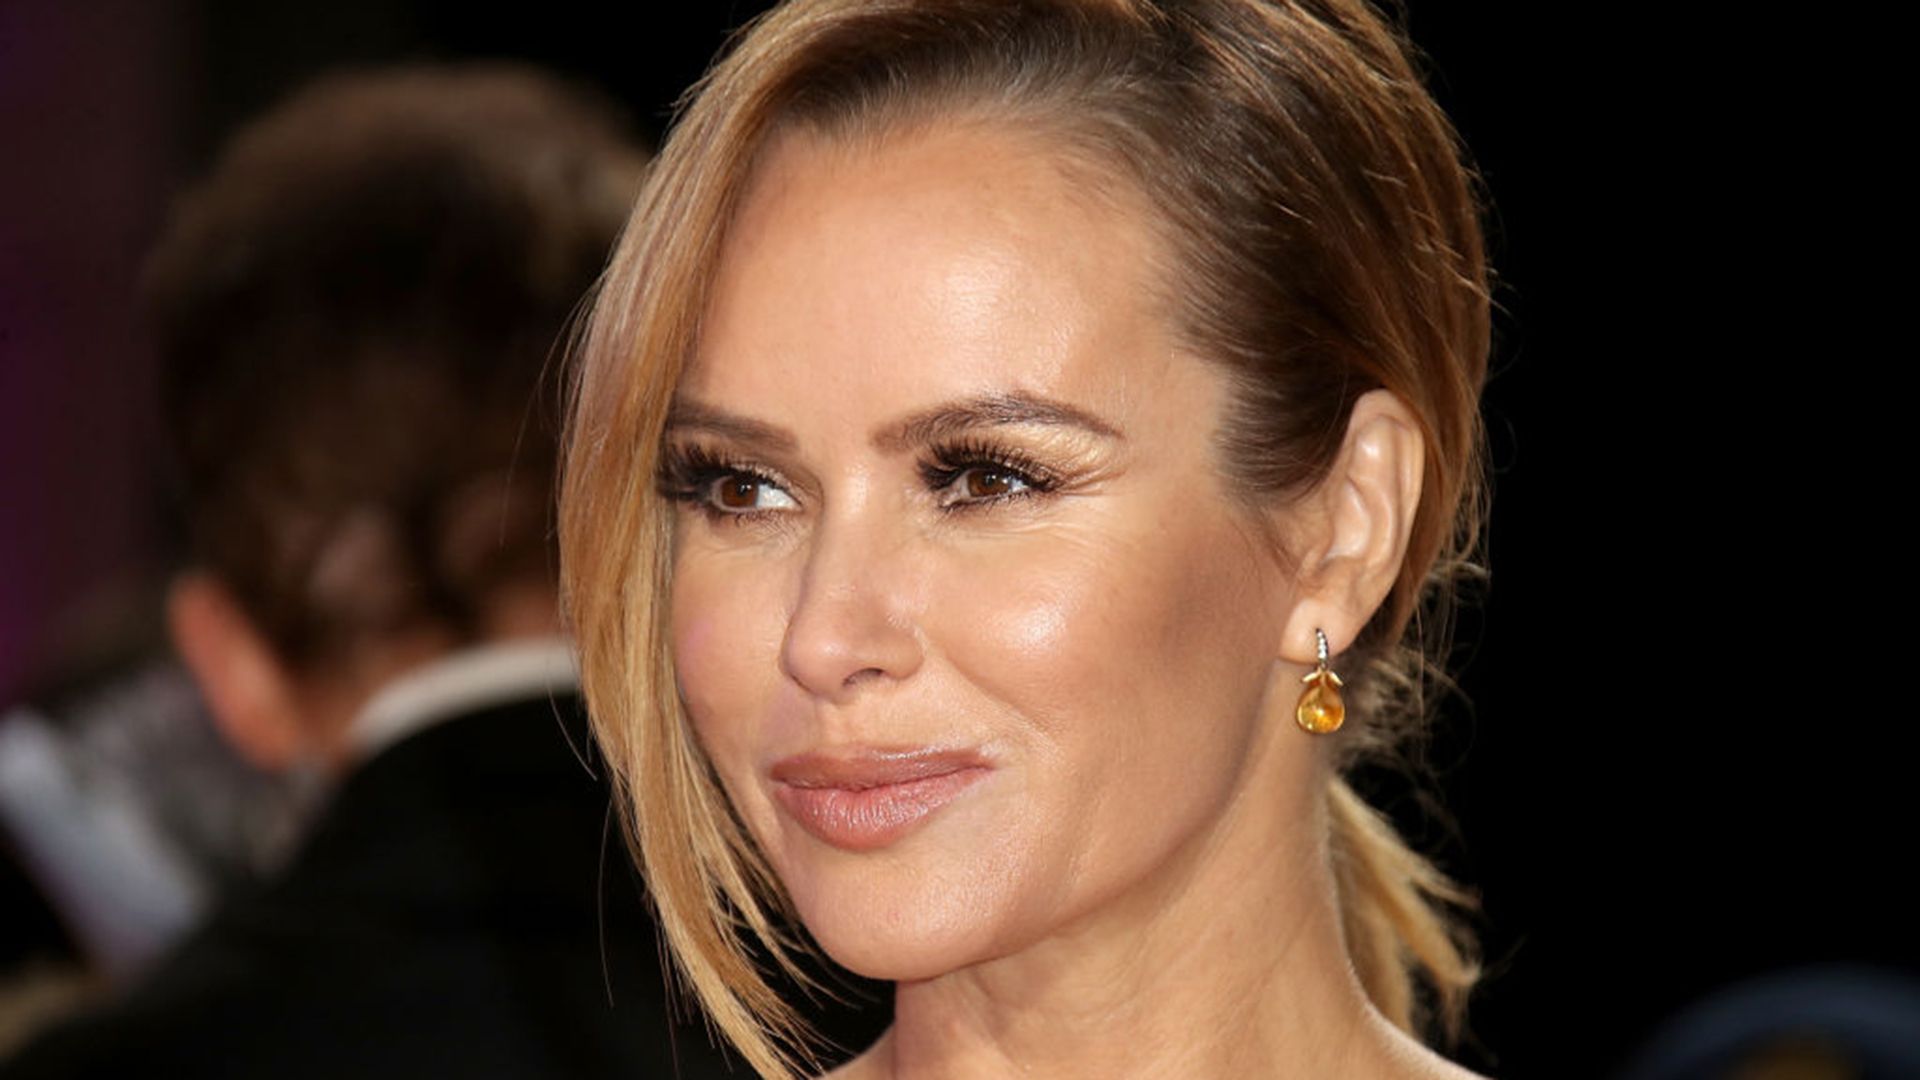 Amanda Holden looks sensational in daring outfit that will make you ...